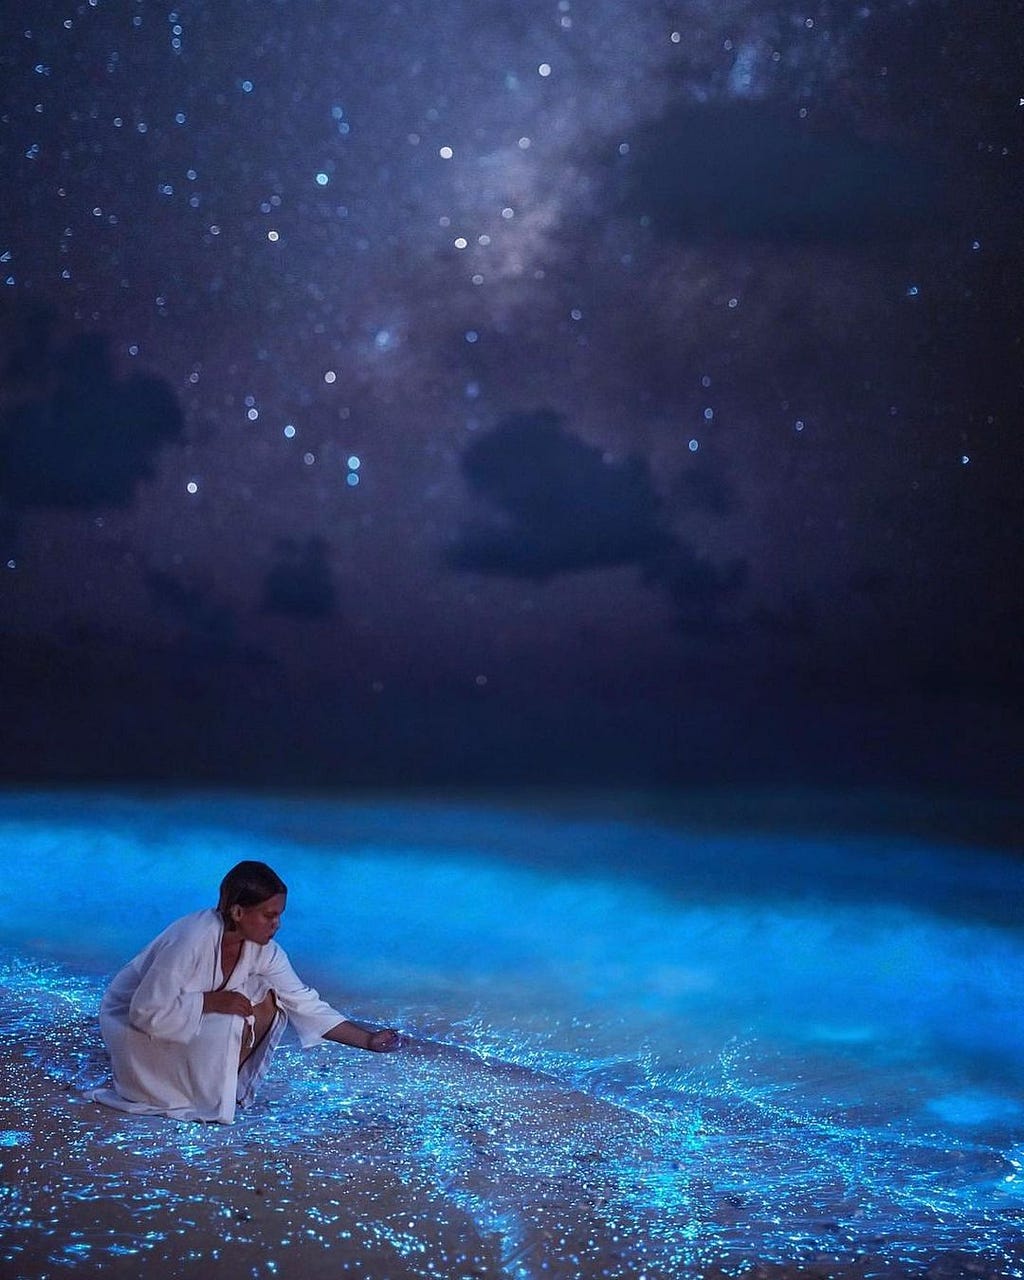 A woman scooping bioluminescent plankton with her hand at nighttime in the Maldives.